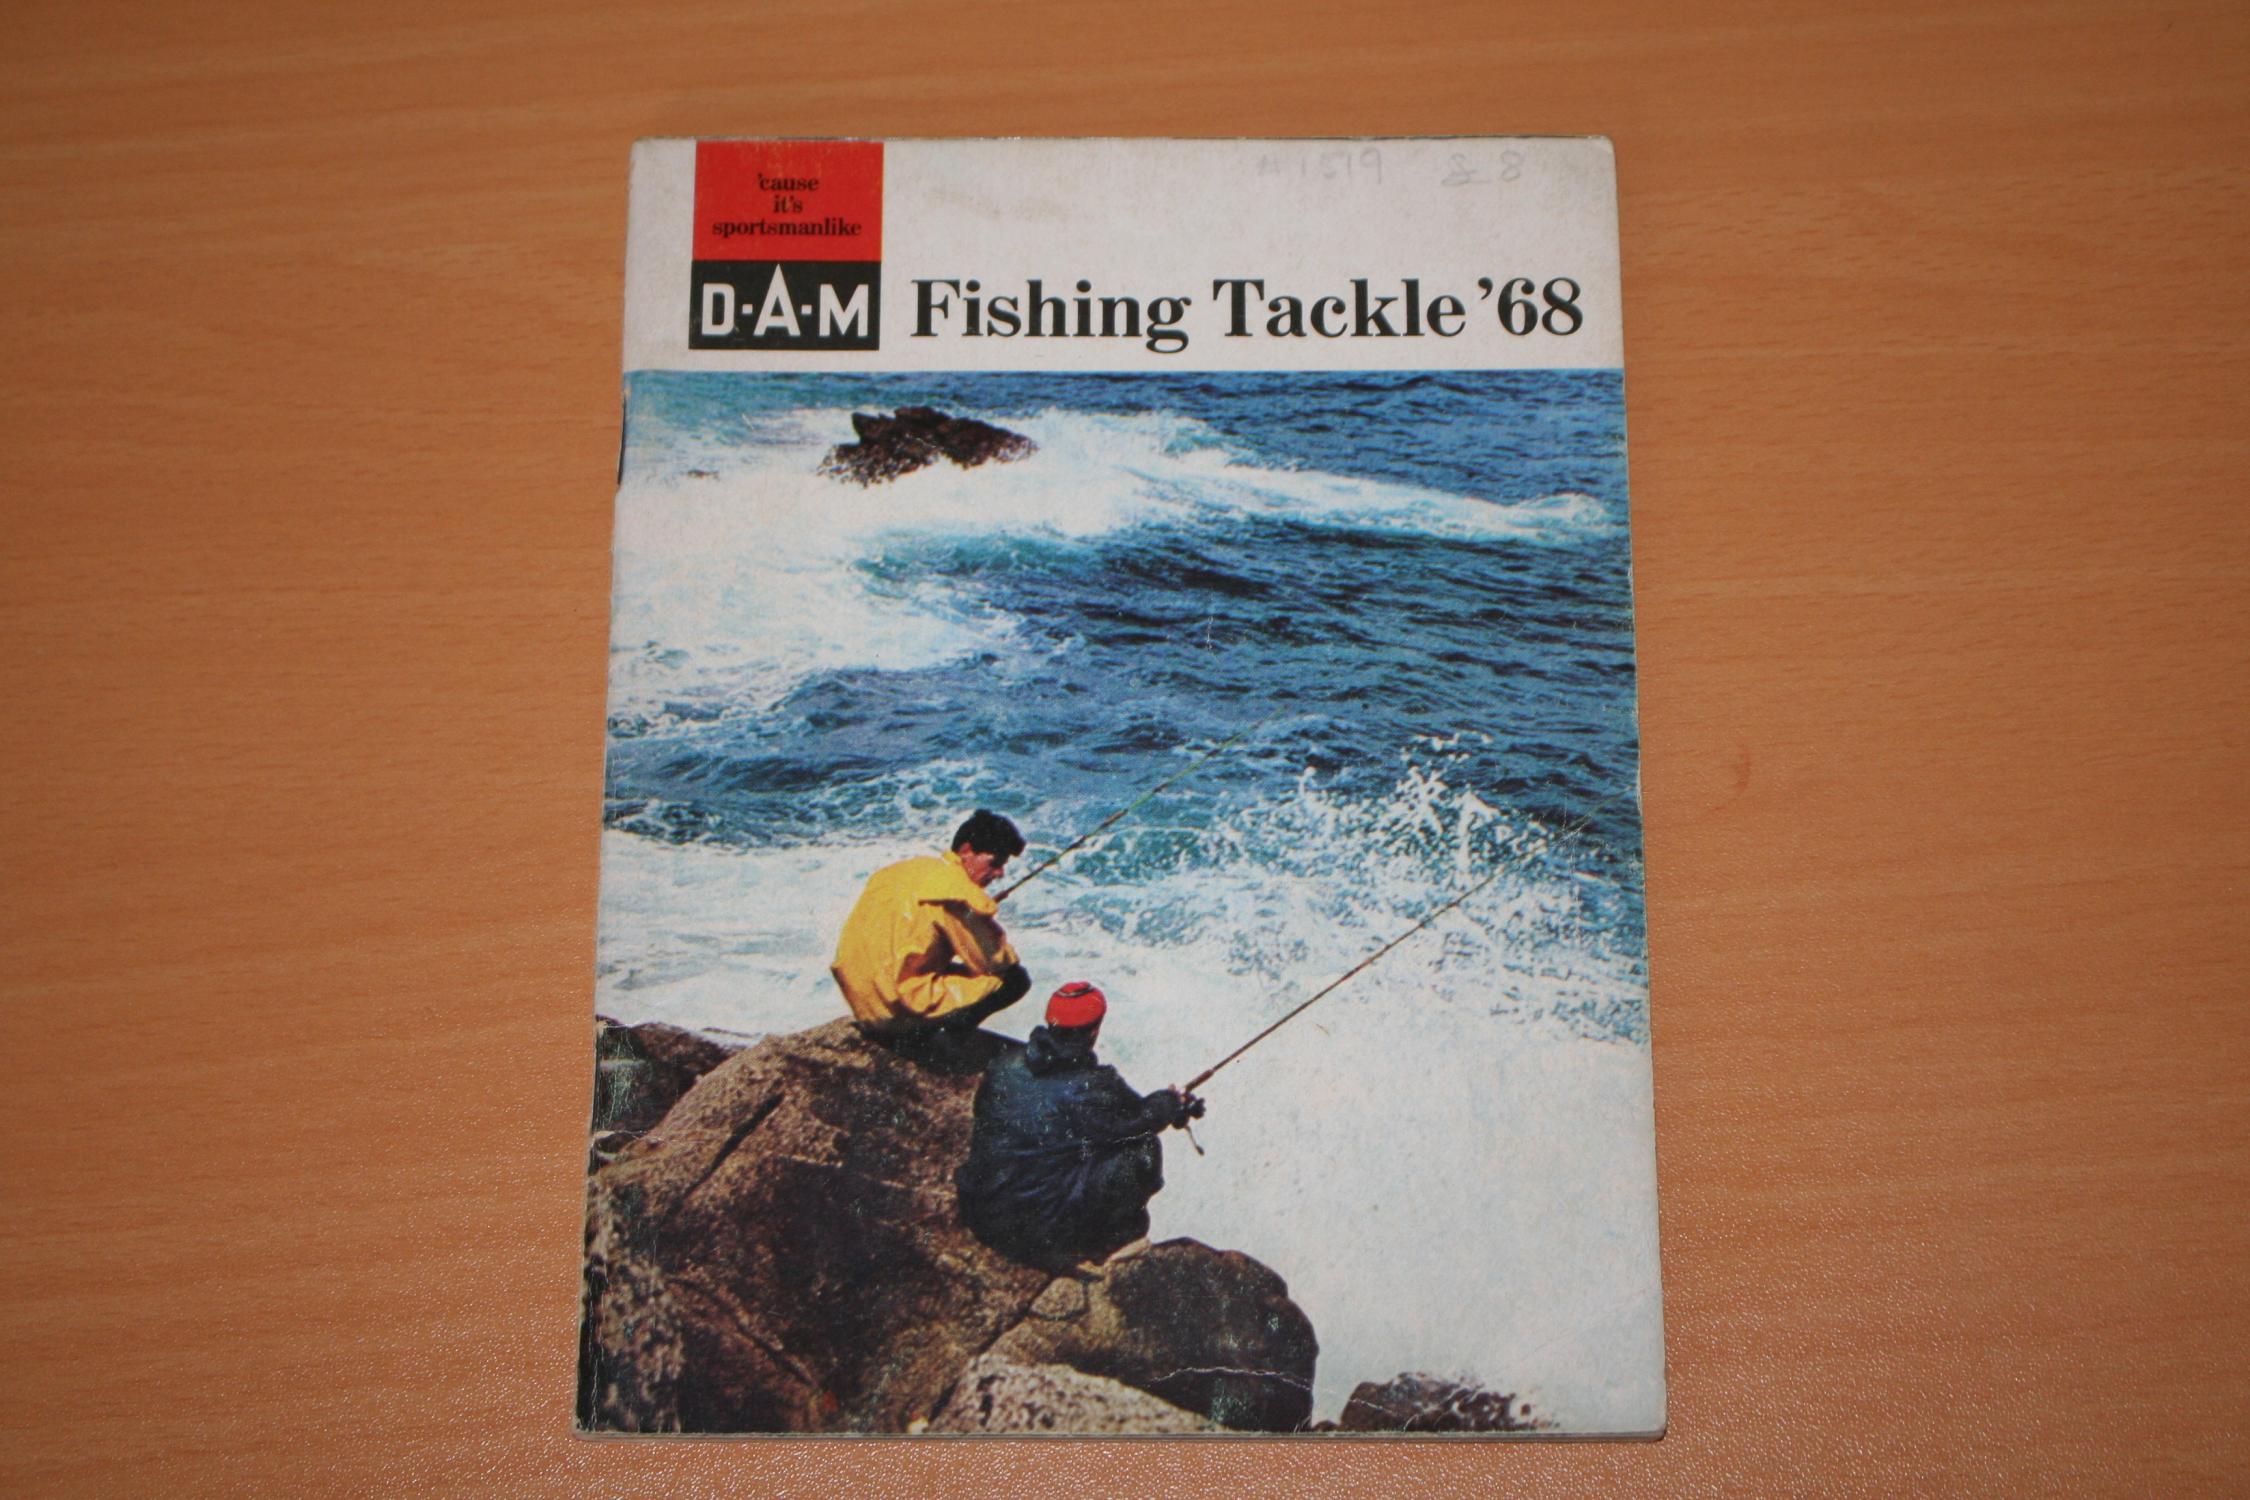 DAM Fishing Tackle '68 by D A M: Good Soft cover (1968) 1st